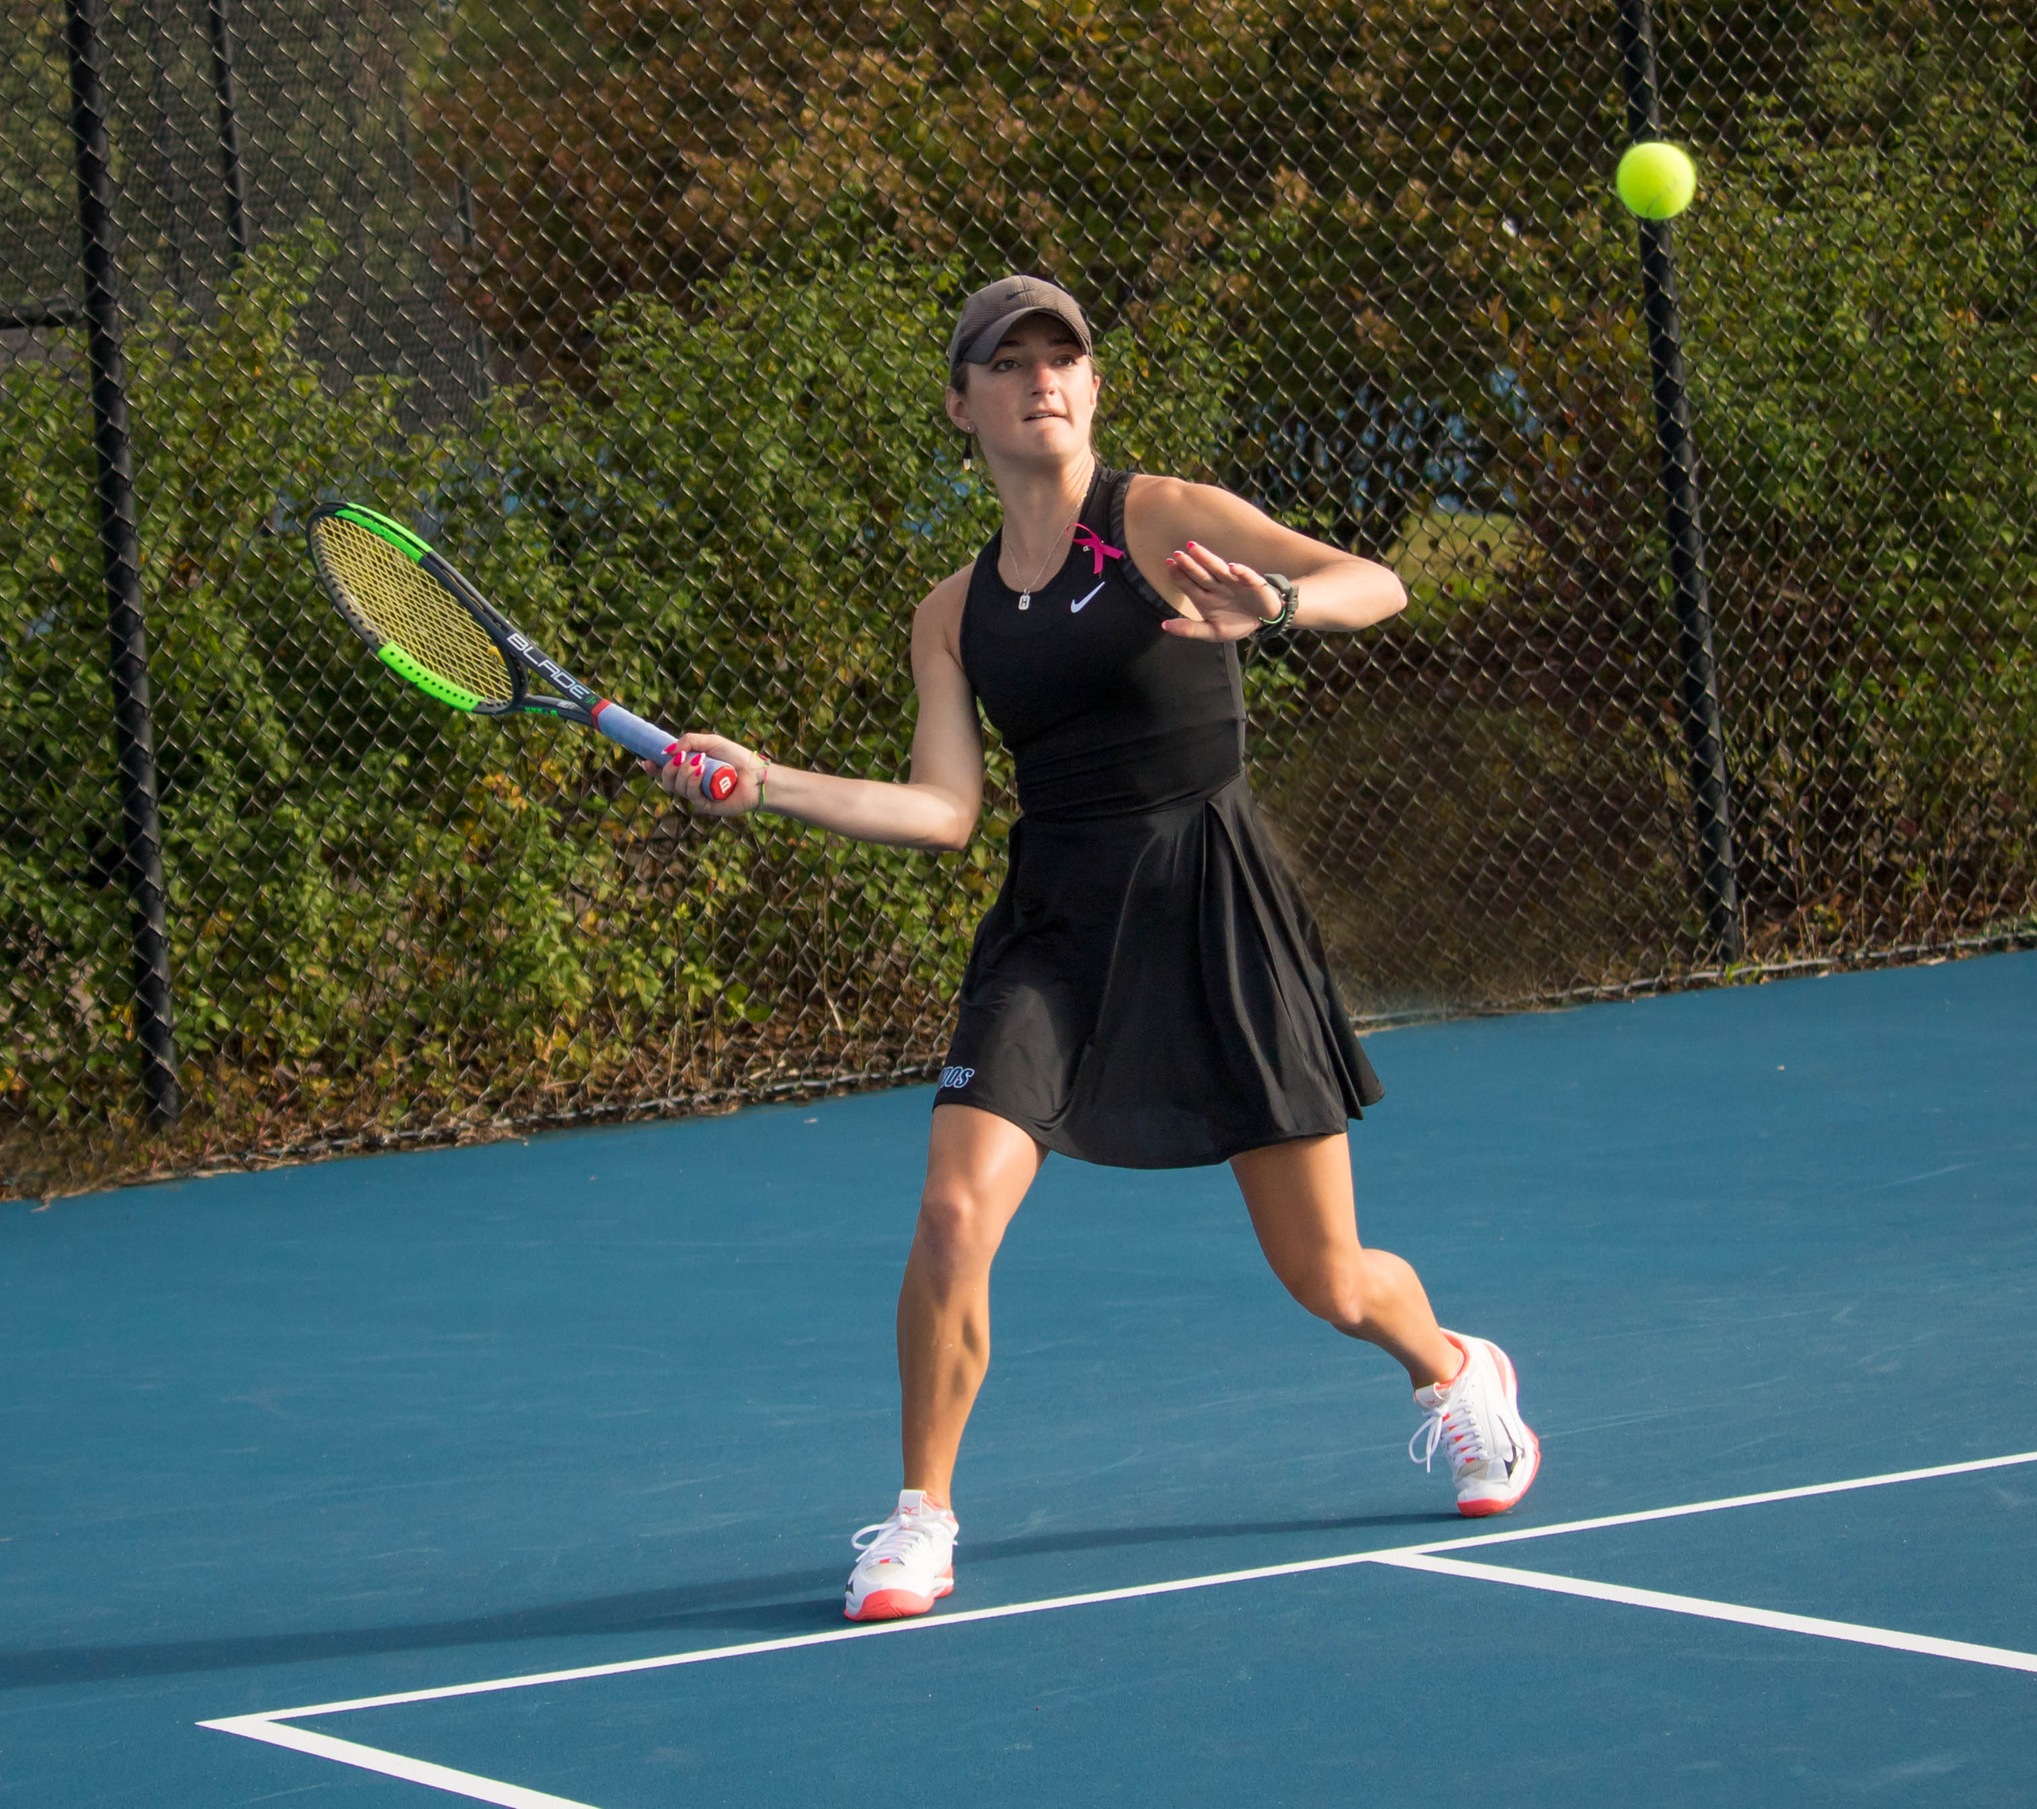 Brevard Cruises to 8-1 Win in First Spring Match